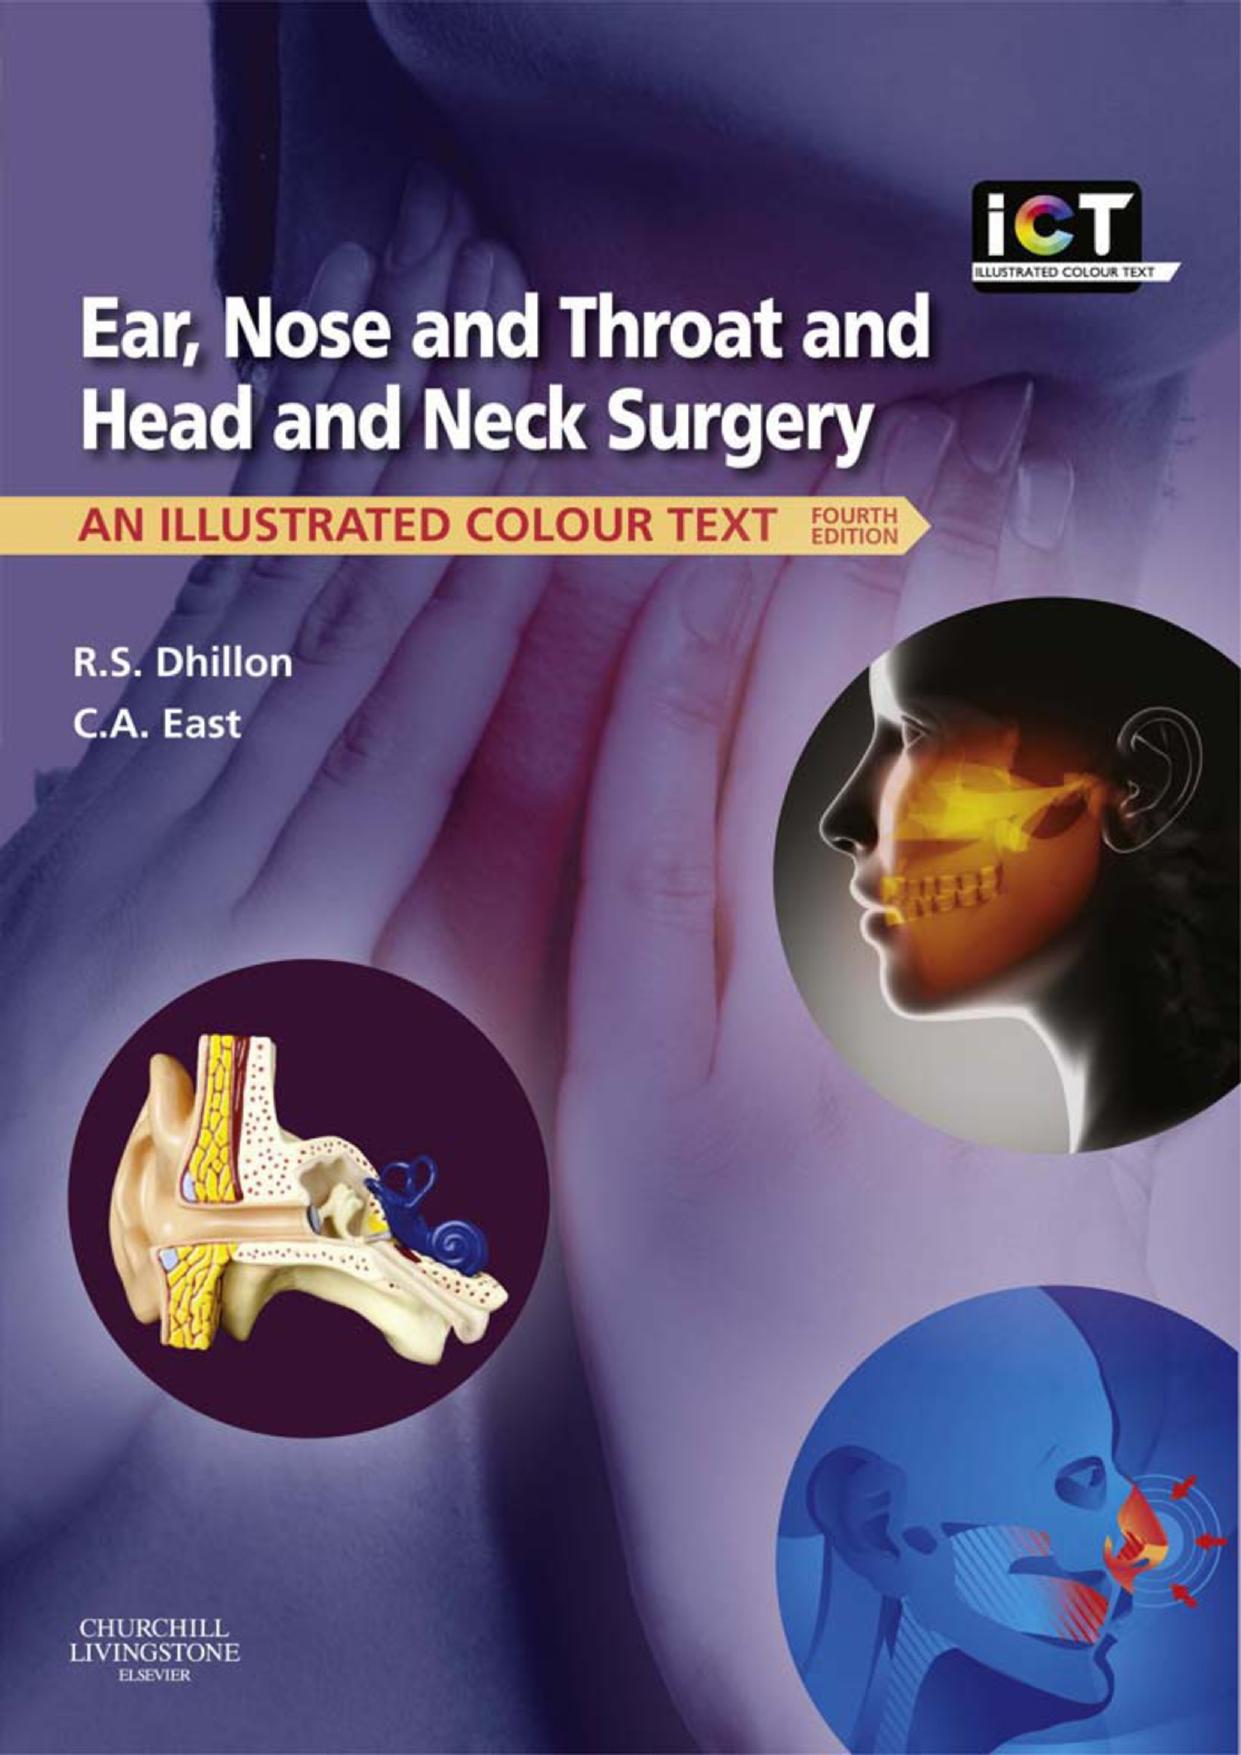 Ear, Nose and Throat and Head and Neck Surgery: An Illustrated Colour Text